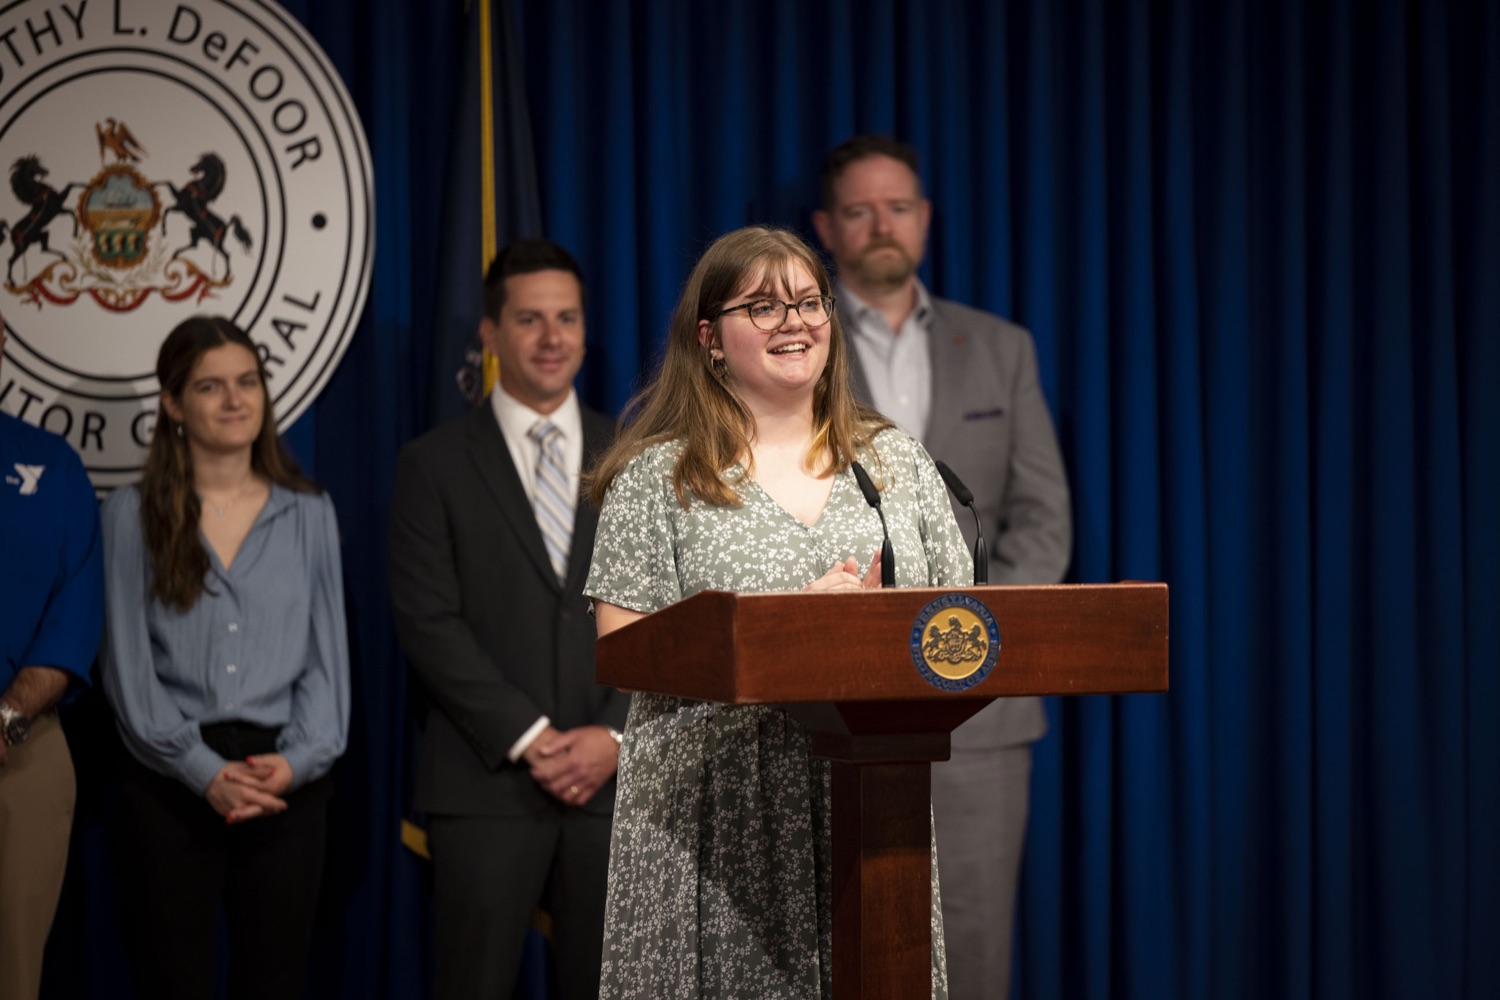 Abigail Mack, a Ligonier Valley School District High School Senior, describes her experience with financial literacy education and how it helped her save for future education expenses, in Harrisburg, PA on May 22, 2023.<br><a href="https://filesource.amperwave.net/commonwealthofpa/photo/23016_audGen_financialLiteracy_10.jpg" target="_blank">⇣ Download Photo</a>